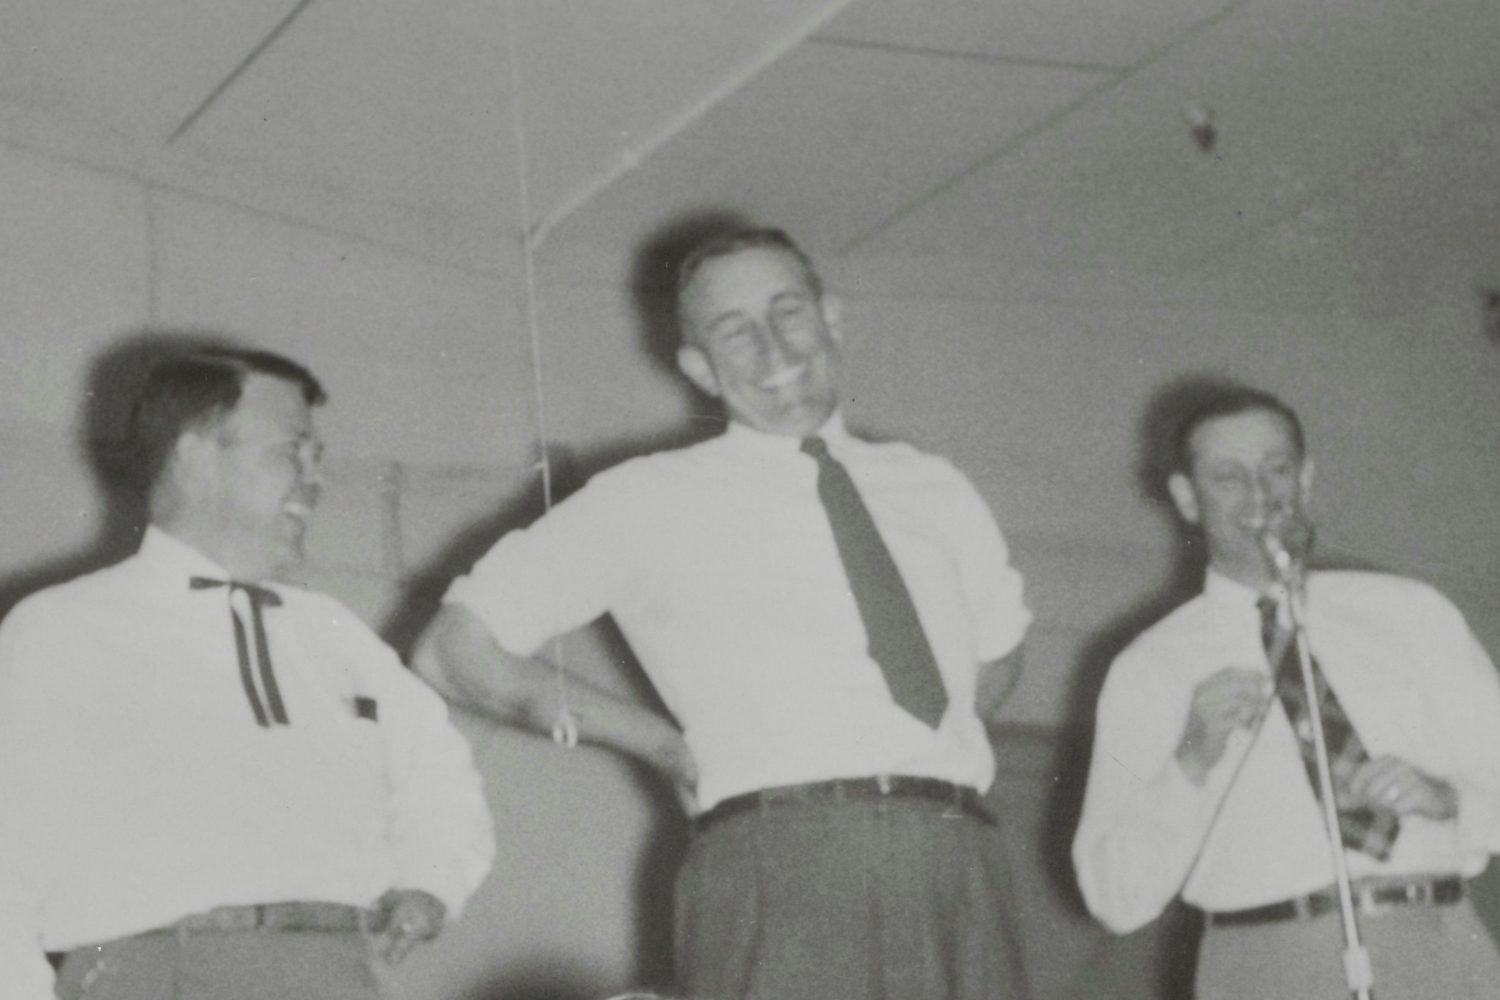 Bill Hewlett and Noel Eldred laughing together in 1954.